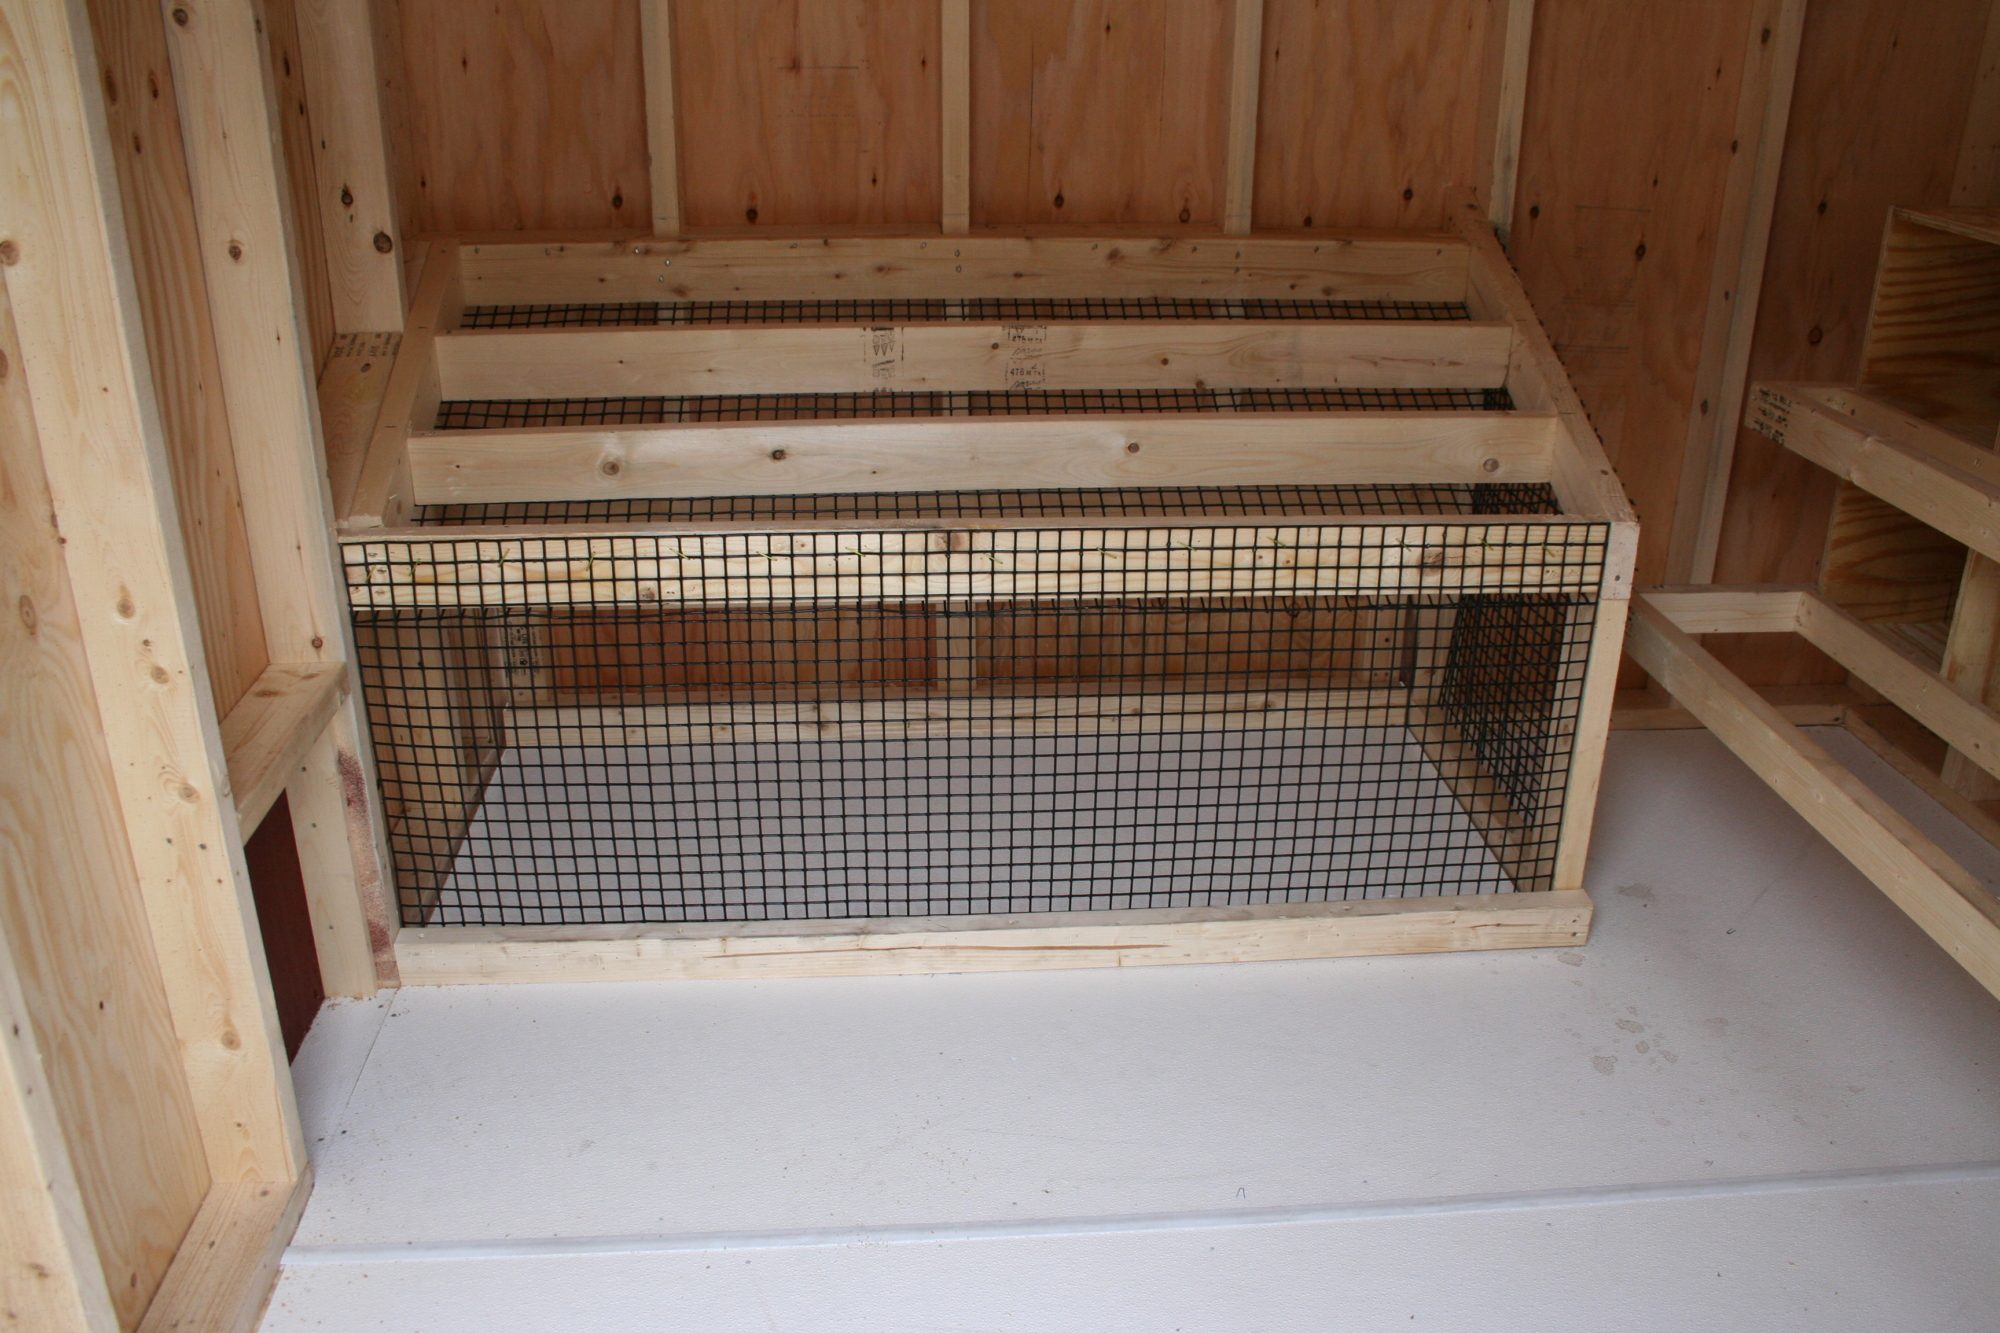 8 x 8 Chicken Coop's Cleaner Coop Cage - Tray pulls out easily form the outside for simple clean up